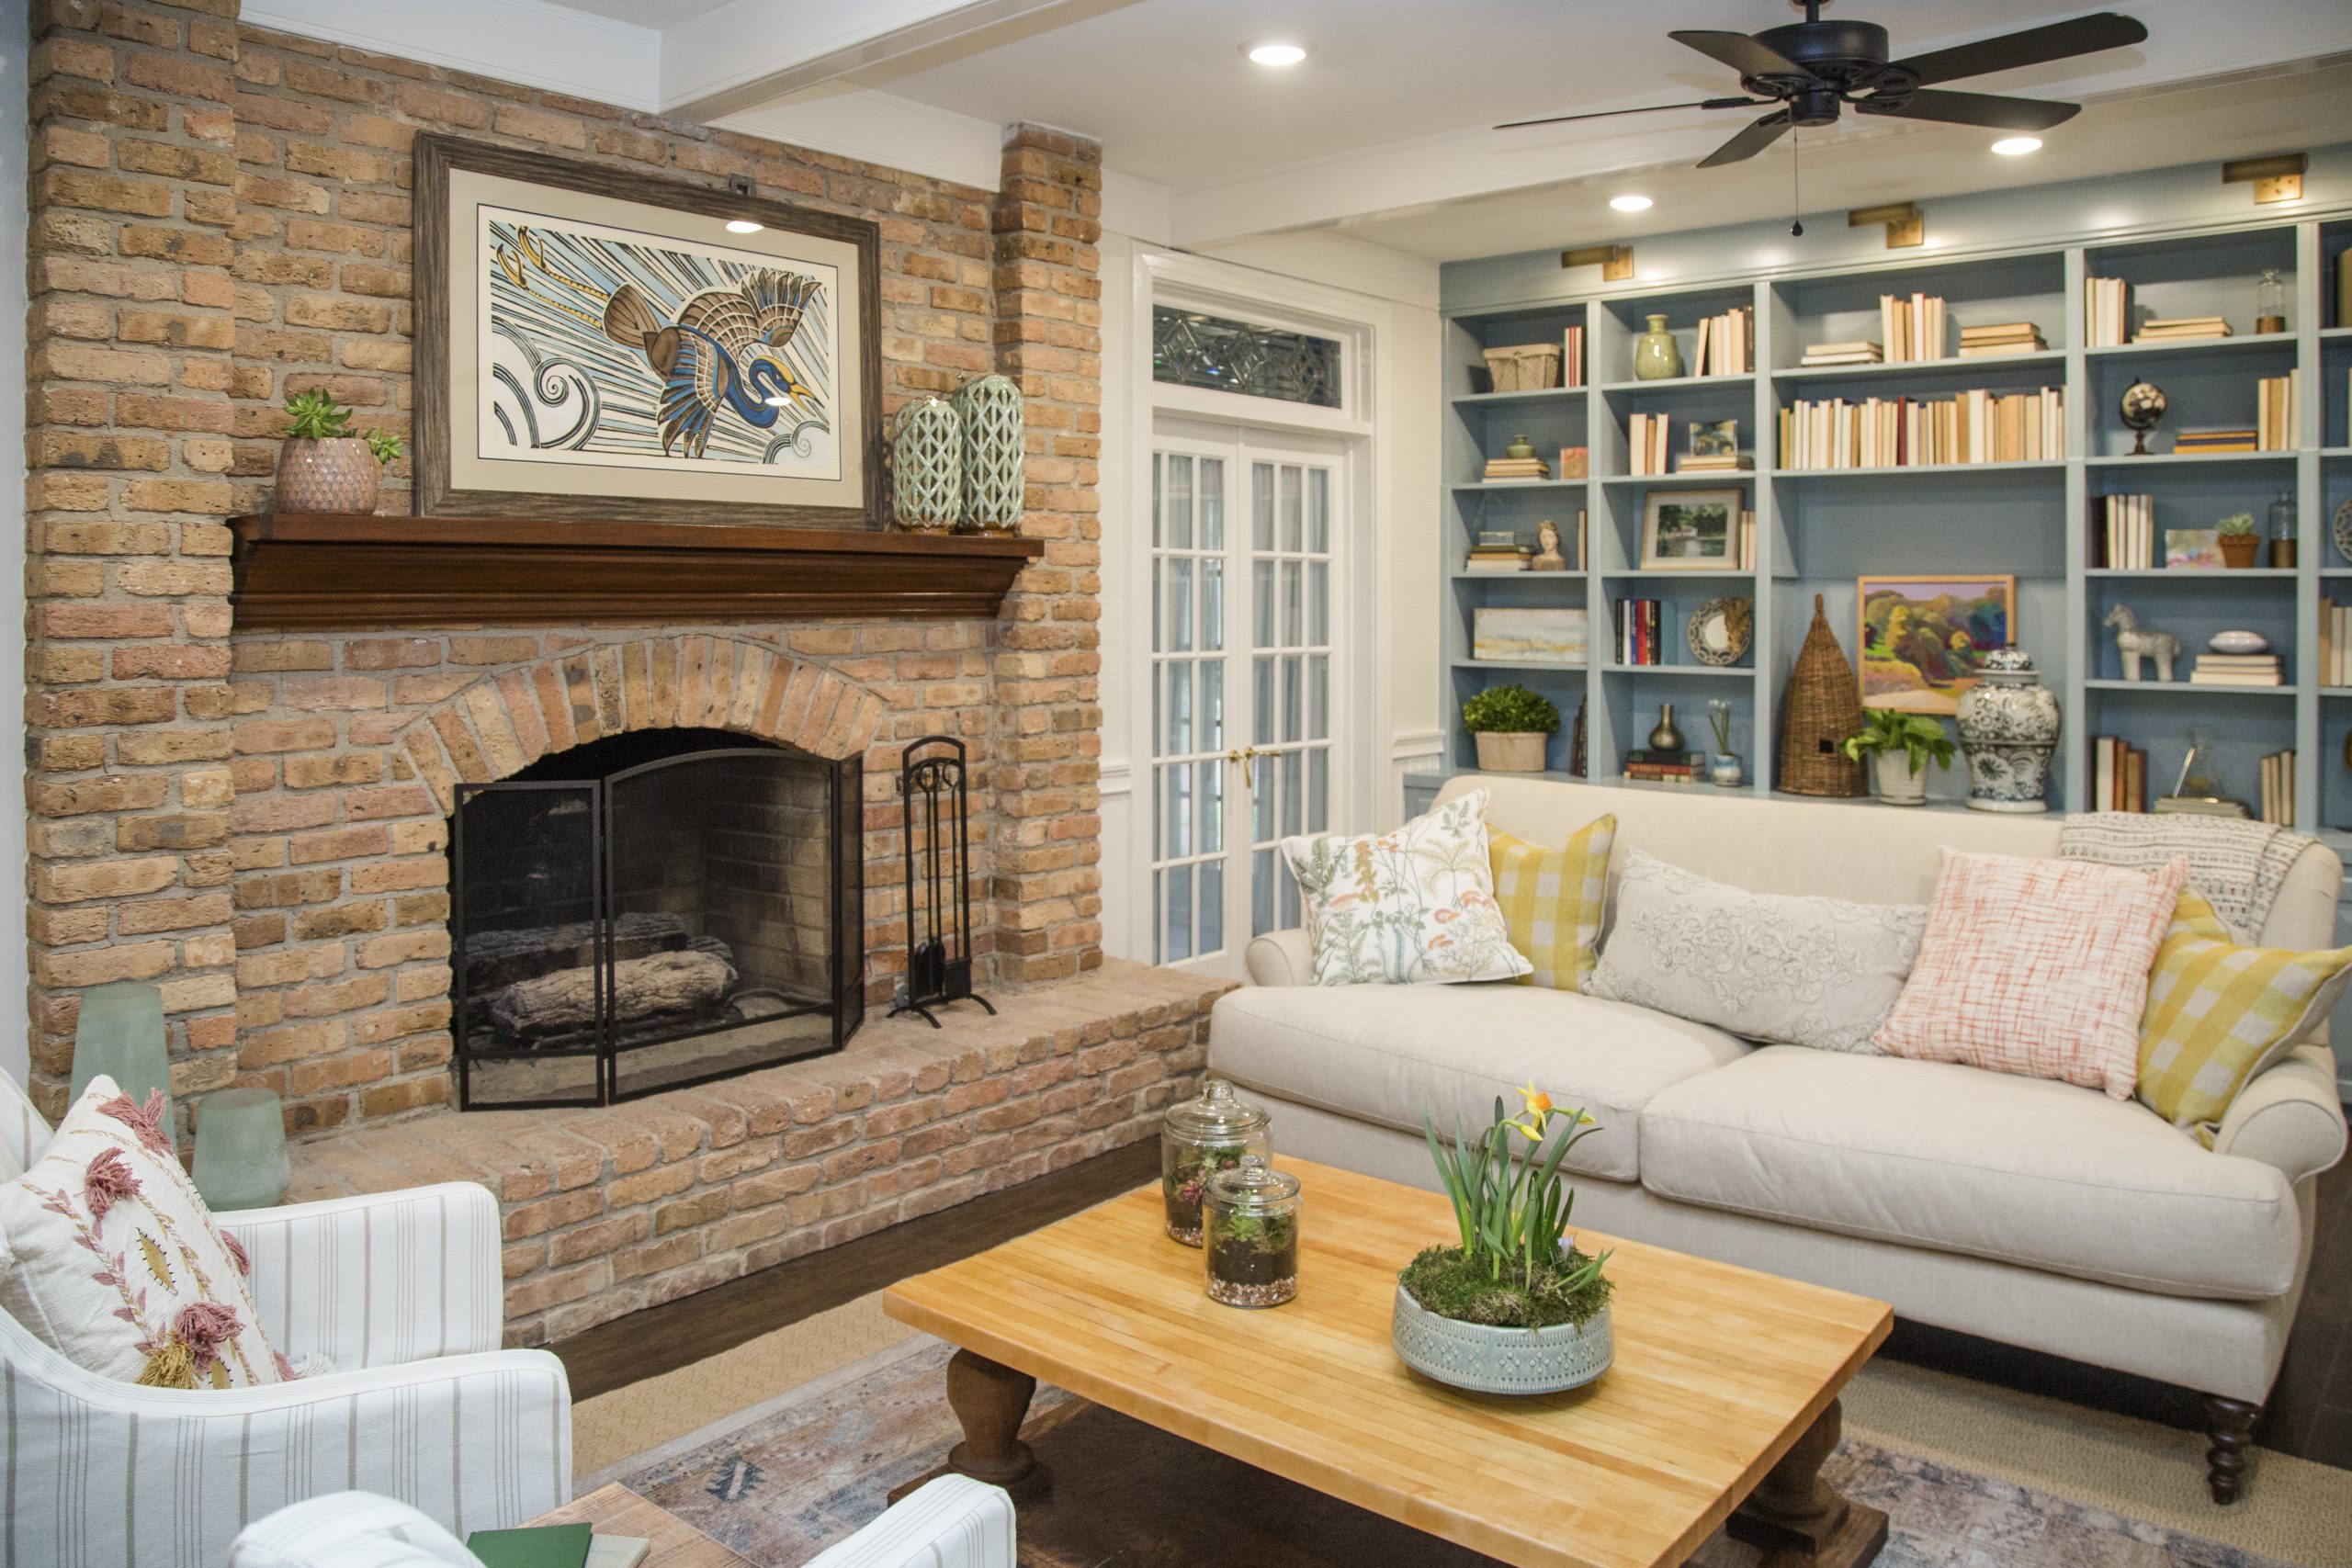 Cozy family room with large brick hearth